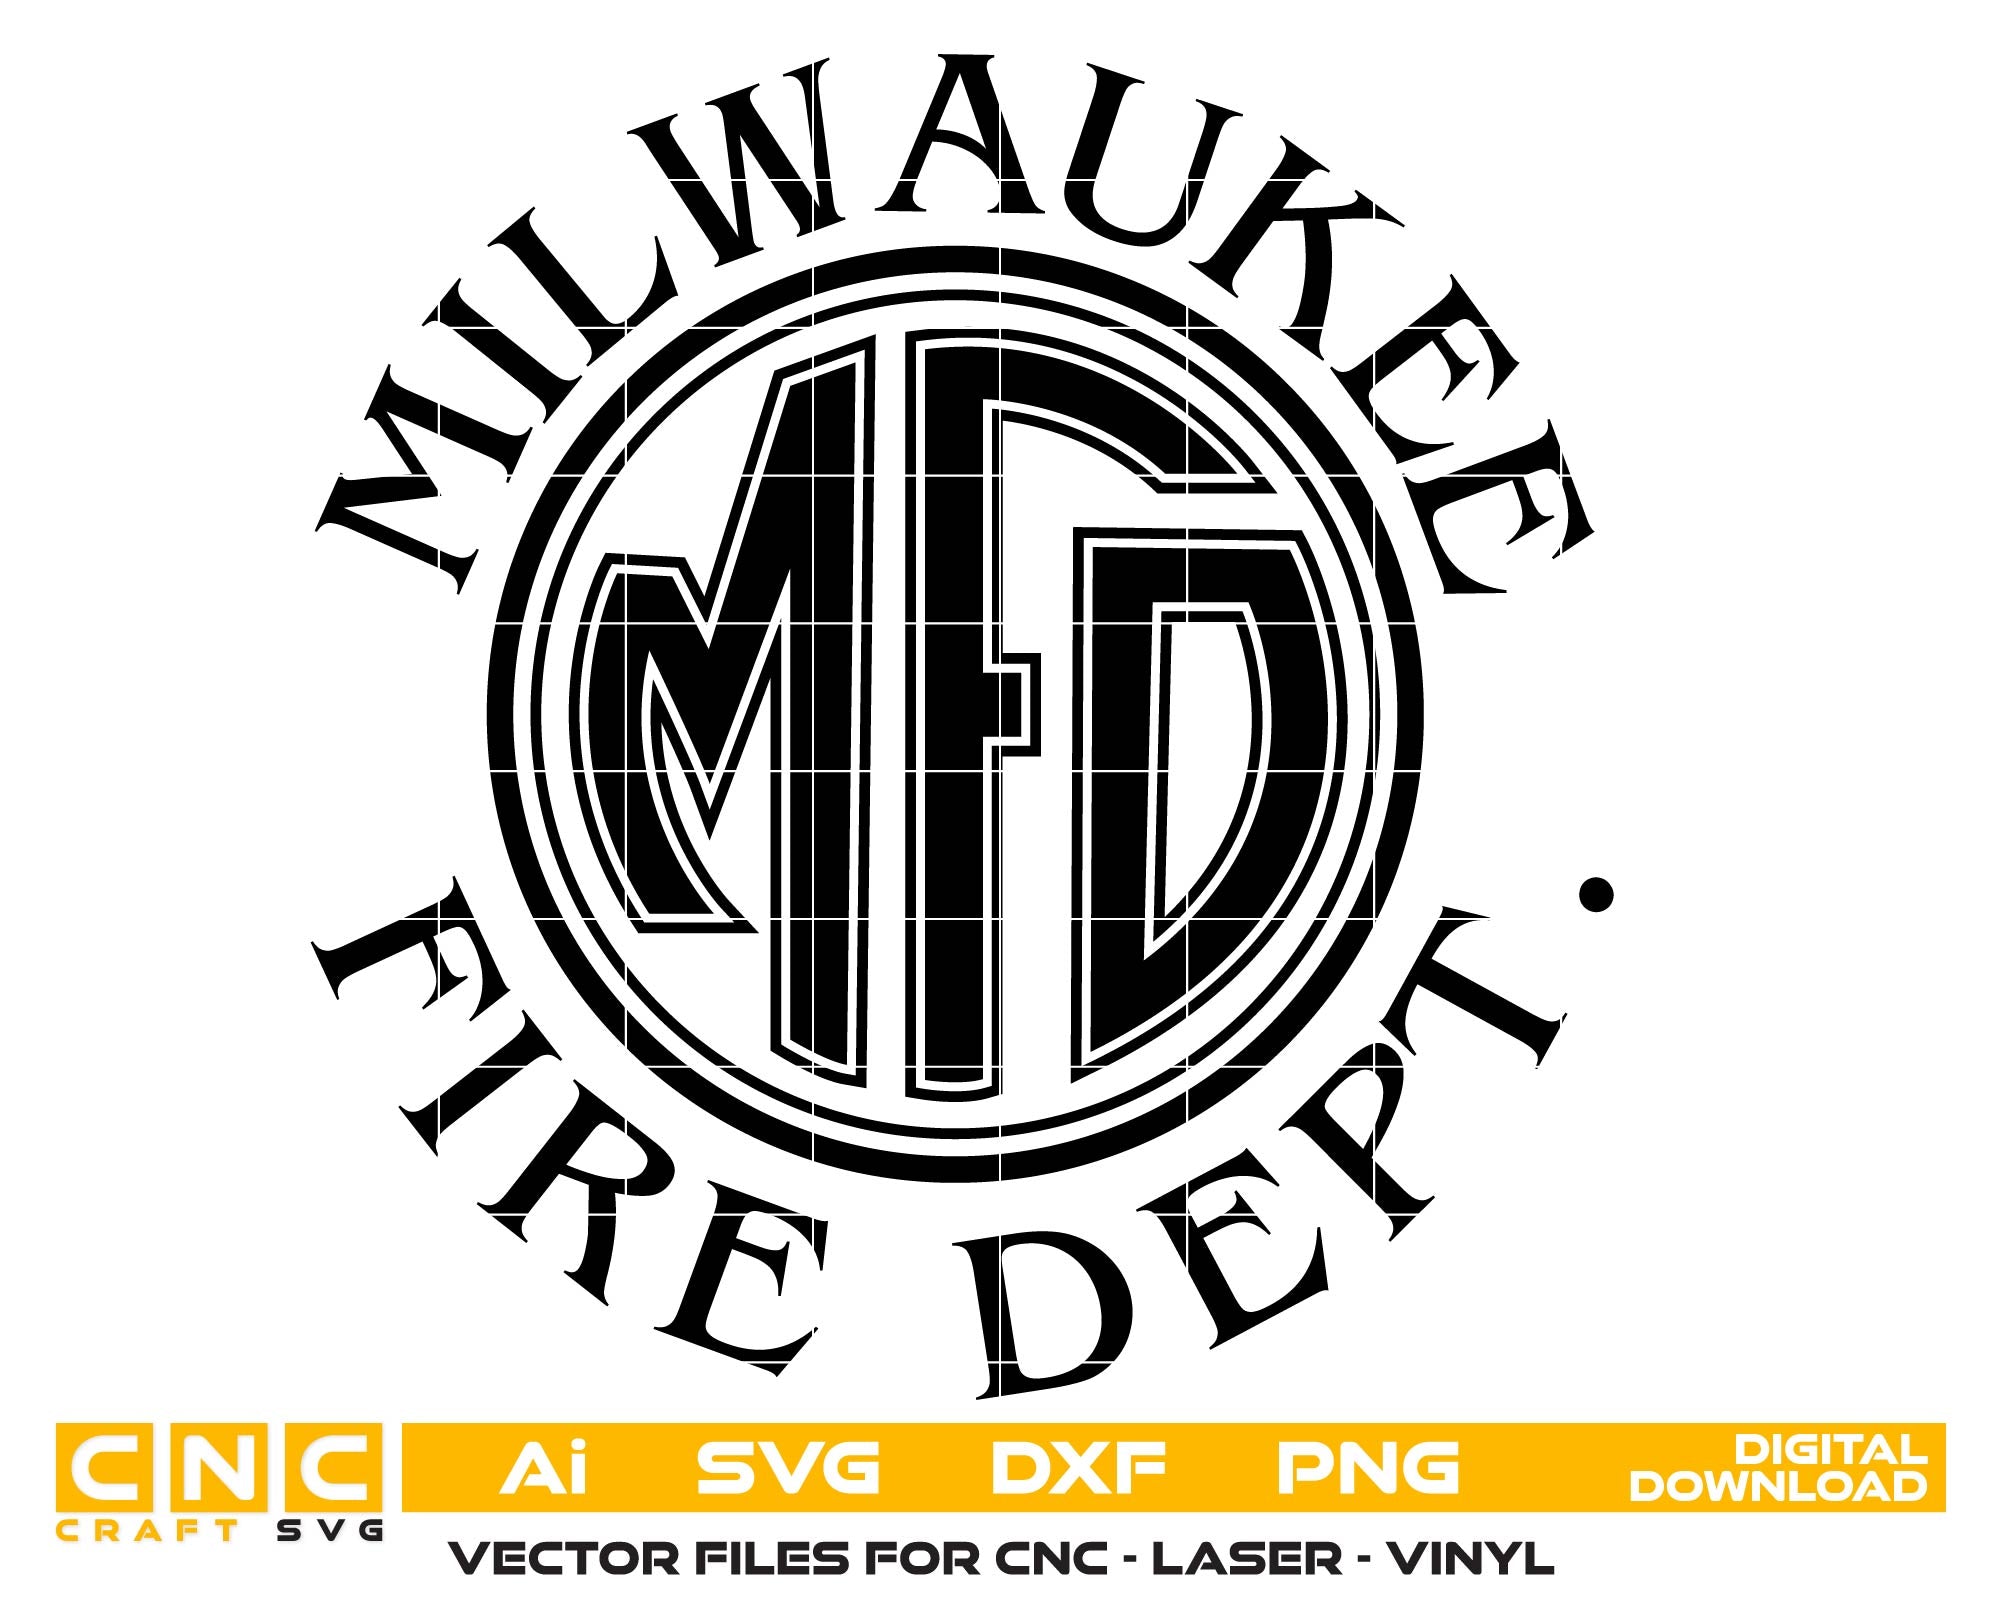 Milwaukee Fire Dept Logo Vector art Svg,Dxf,Jpg,Png & Ai files for Engraving, woodworking and Printing